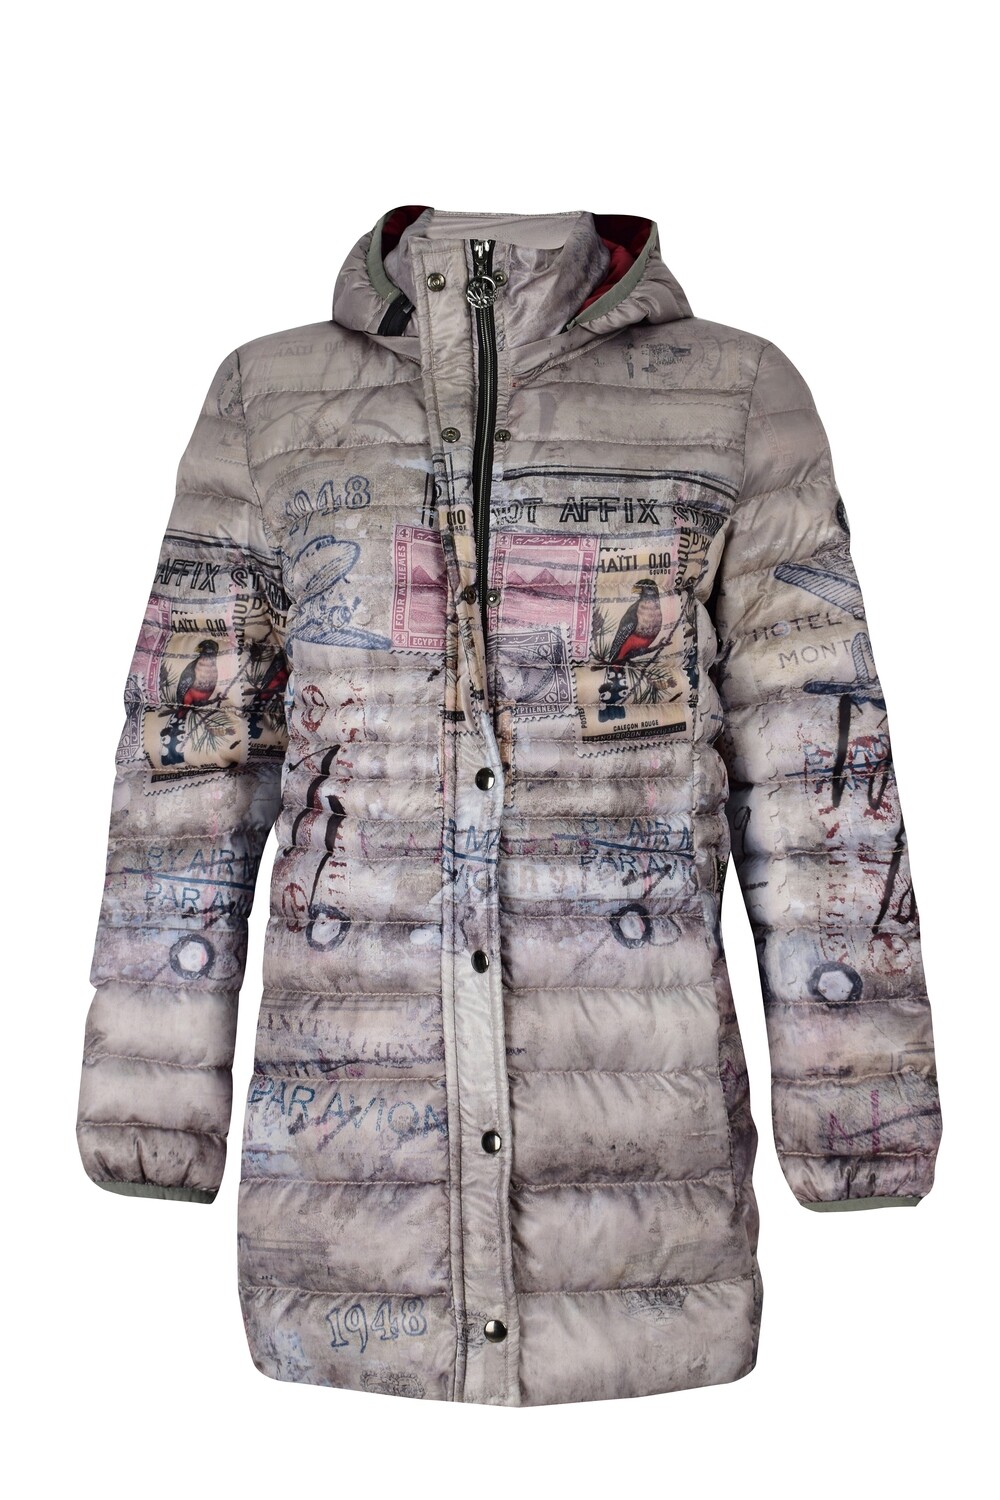 Simply Art Dolcezza: Do Not Affix Stamp Graffiti Abstract Art Puffer Coat SOLD OUT